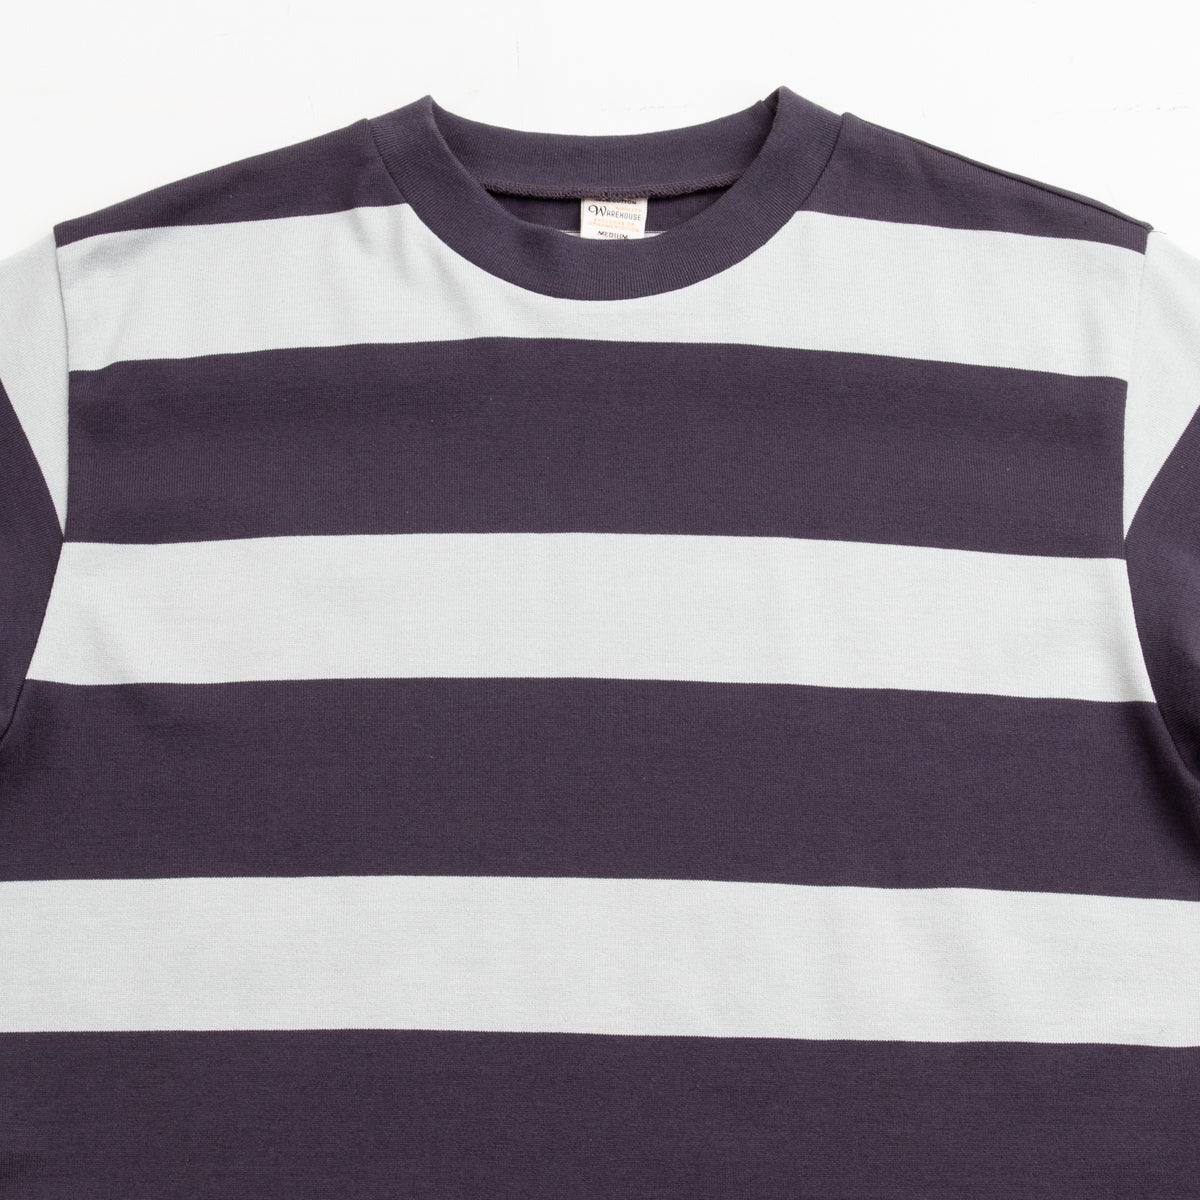 Short Sleeved Striped Crewneck Tee in Navy + White